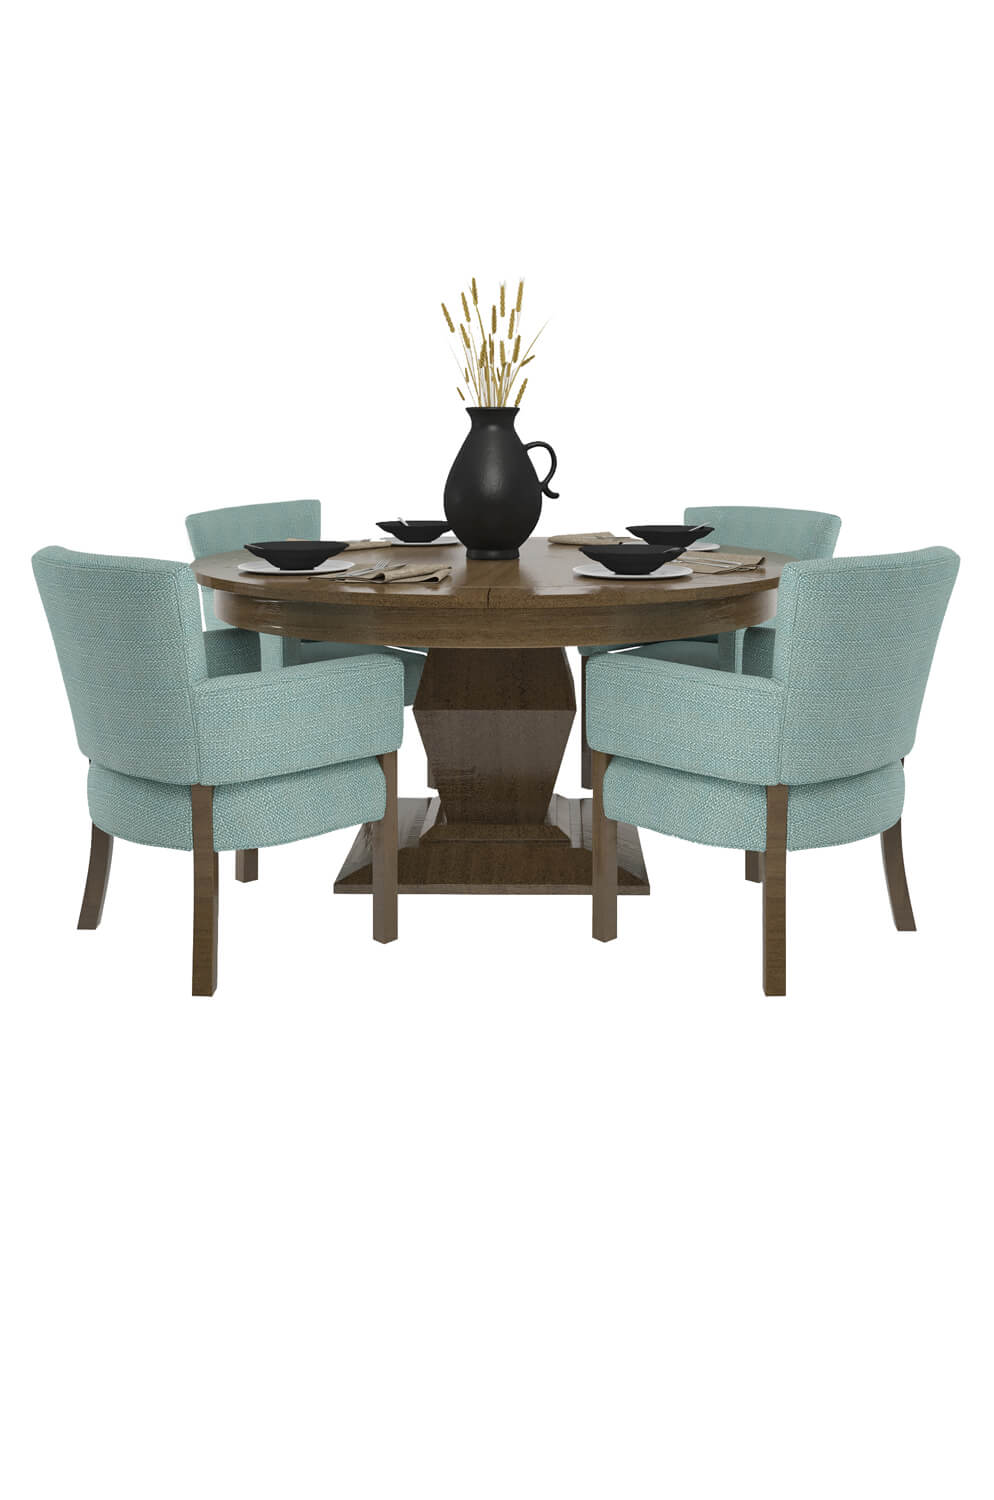 Darafeev's Euclid Modern Poker Dining Table Set with Four Chairs